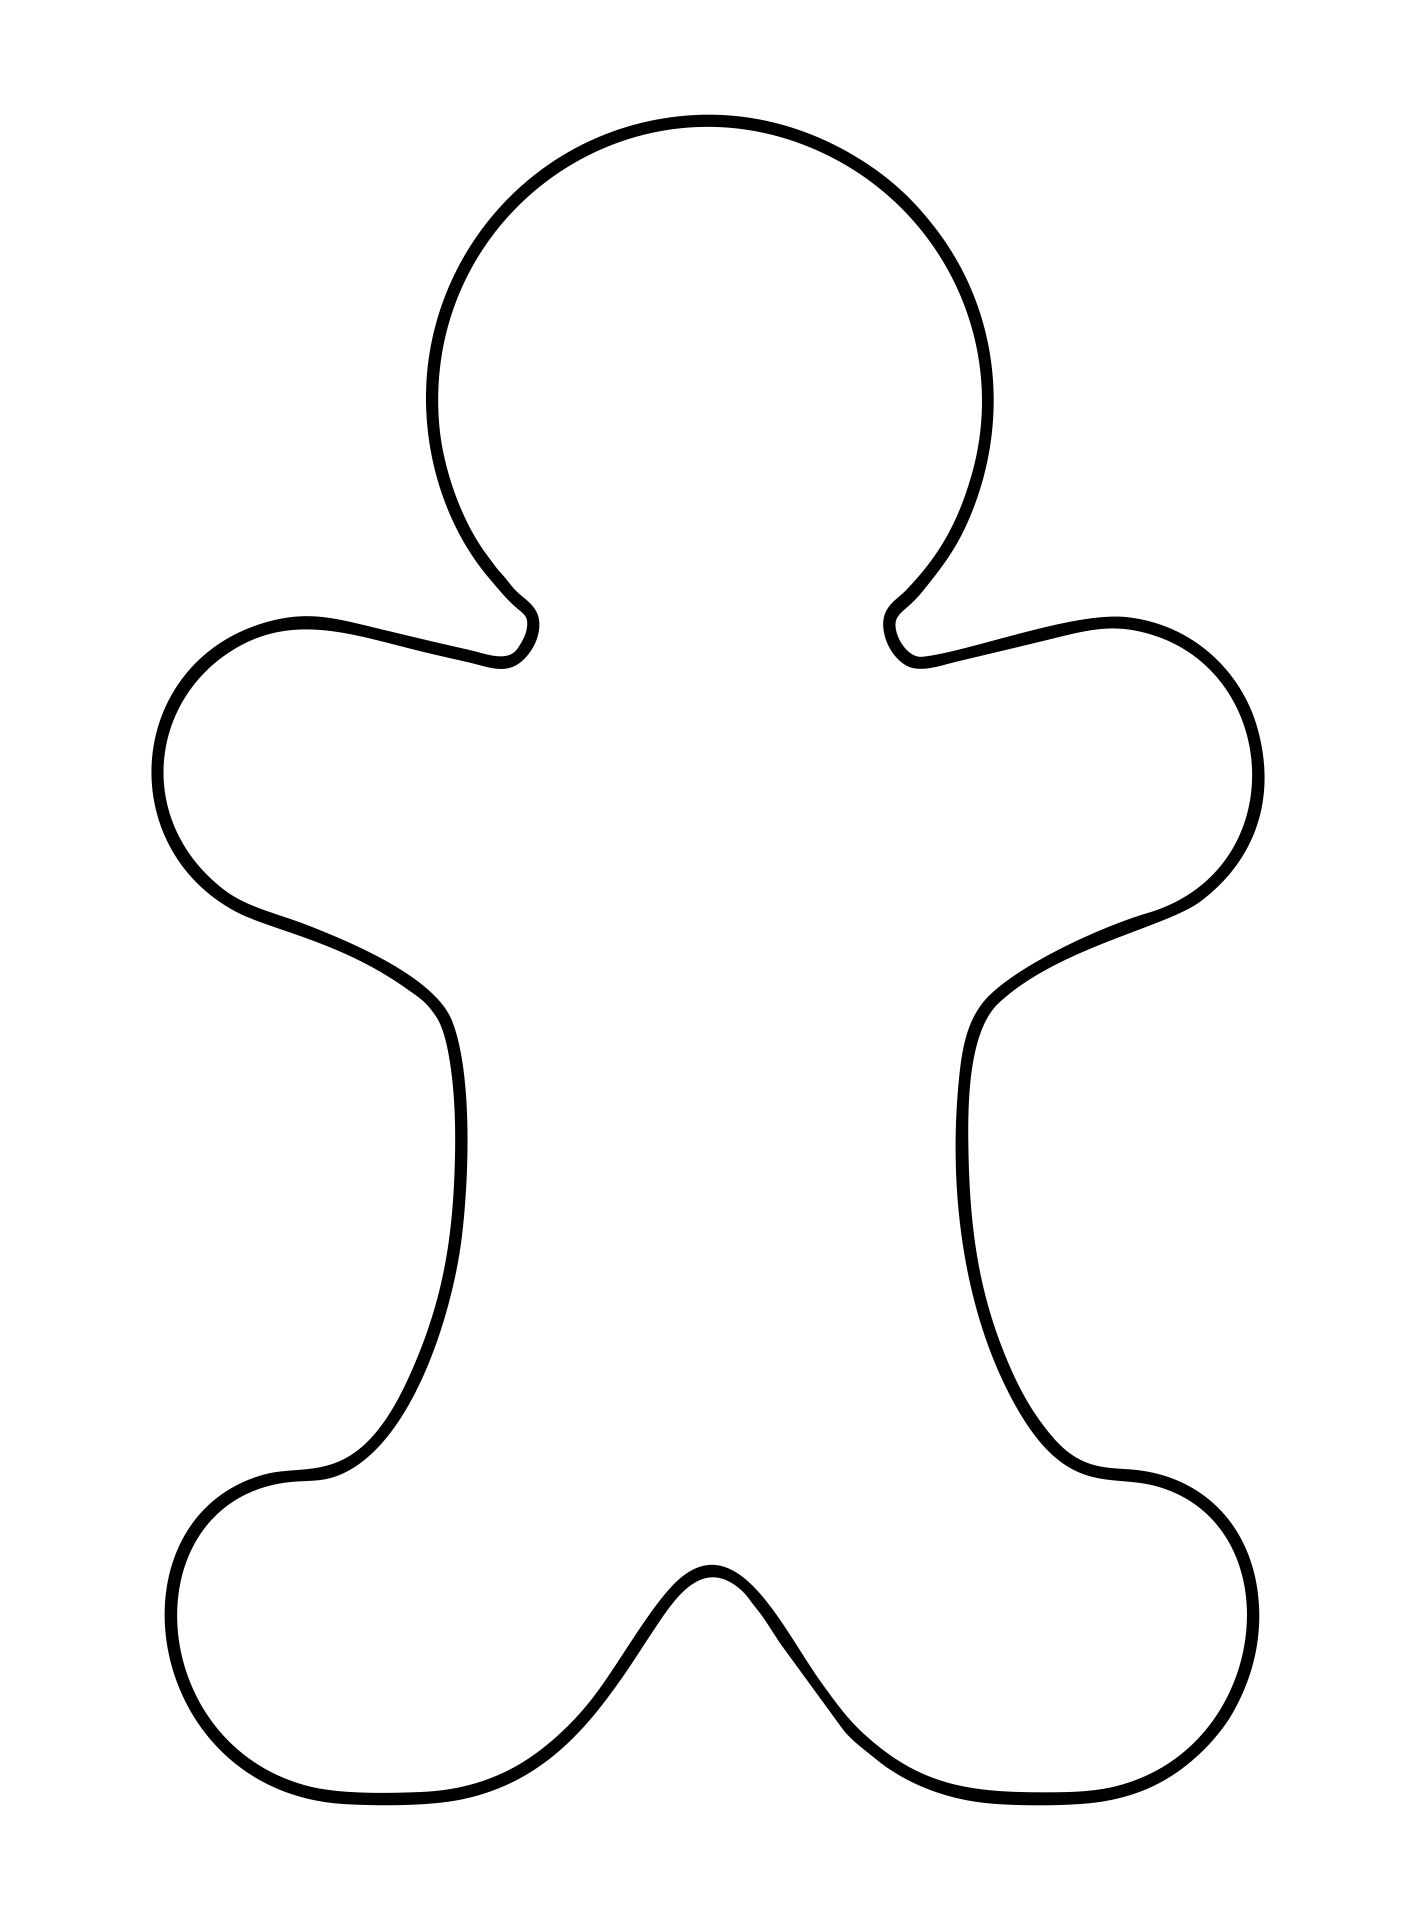 Blank Gingerbread Man Coloring Page